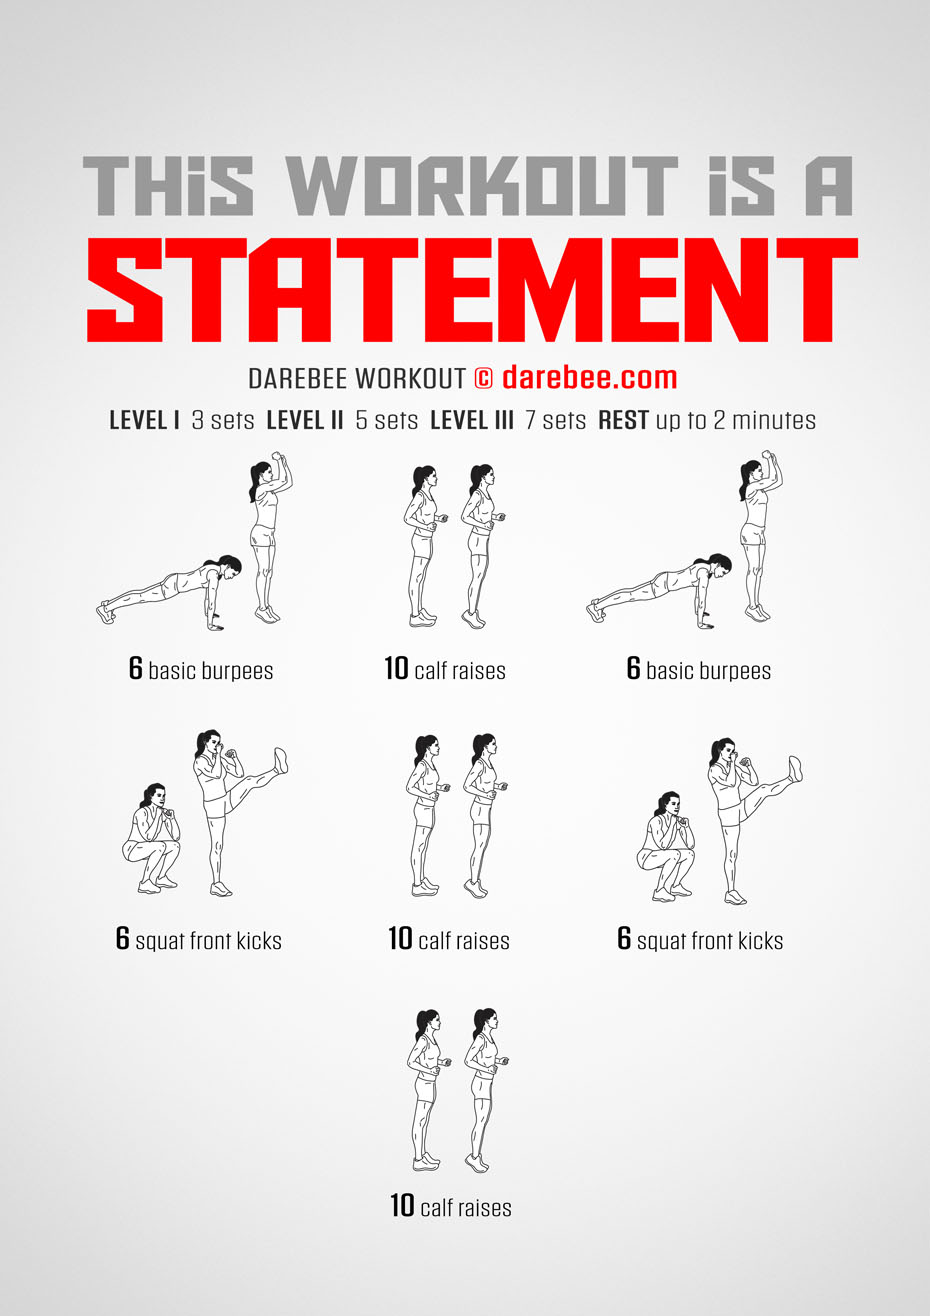 This Workout Is A Statement is a Darebee home fitness workout that moves large muscle groups quickly.